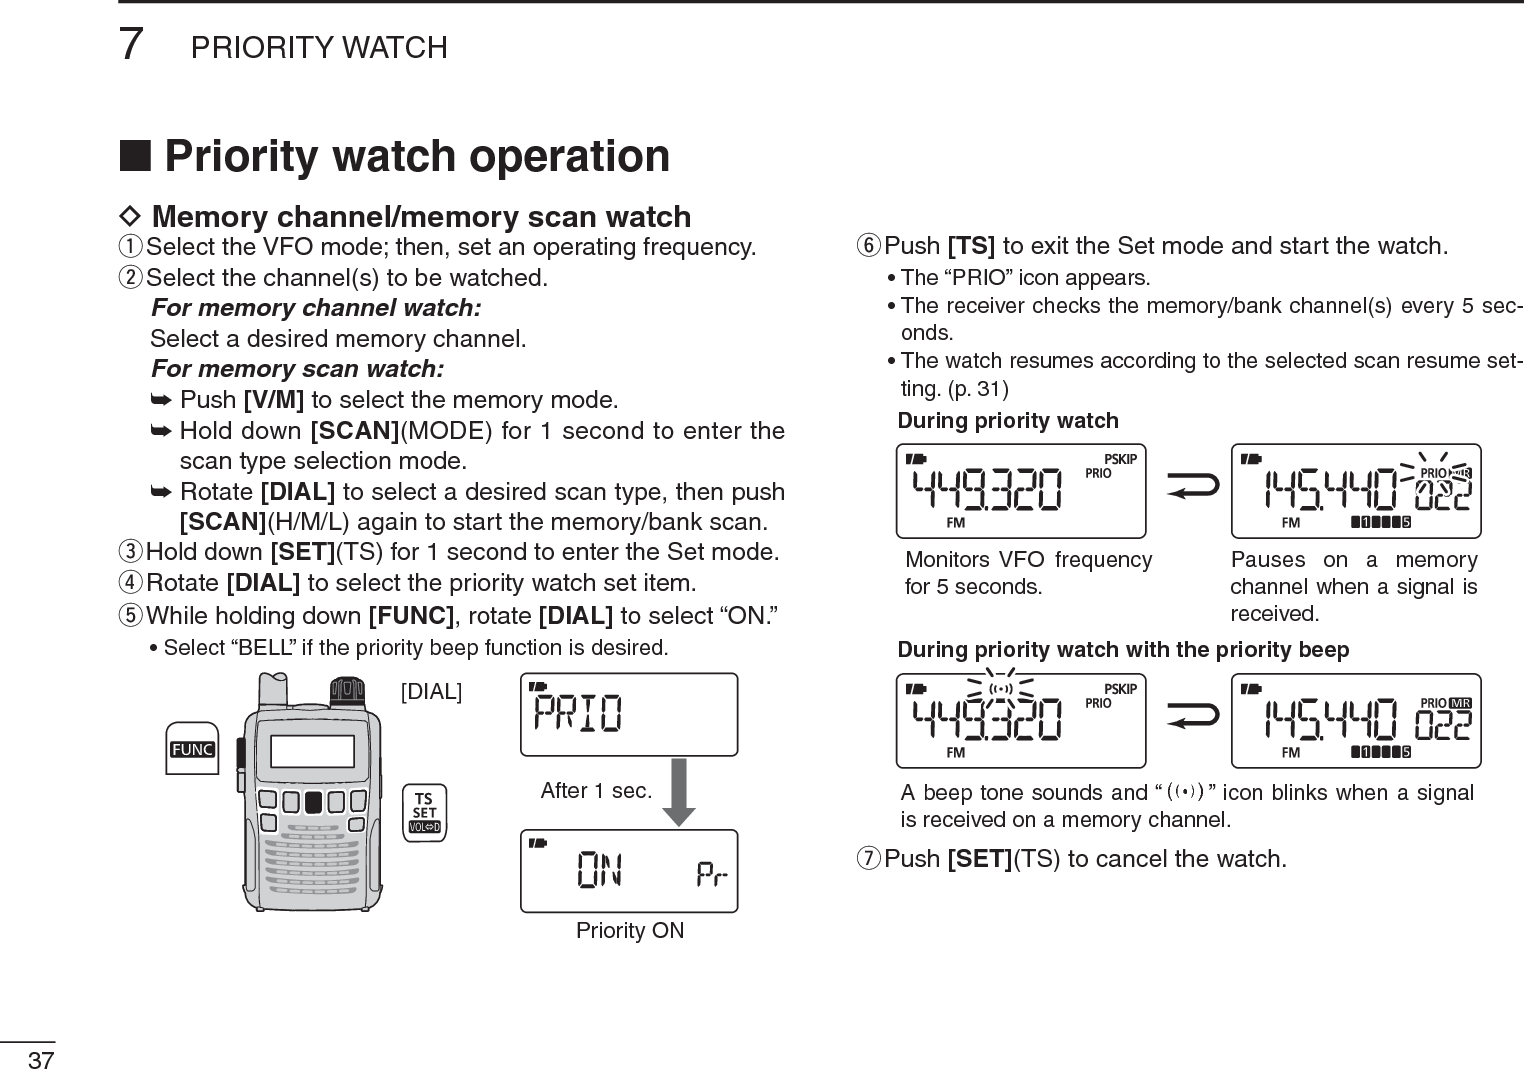 377PRIORITY WATCHNPriority watch operationD Memory channel/memory scan watchqSelect the VFO mode; then, set an operating frequency.wSelect the channel(s) to be watched.For memory channel watch:Select a desired memory channel.For memory scan watch:± Push [V/M] to select the memory mode.±Hold down [SCAN](MODE) for 1 second to enter the scan type selection mode.±Rotate [DIAL] to select a desired scan type, then push [SCAN](H/M/L) again to start the memory/bank scan.eHold down [SET](TS) for 1 second to enter the Set mode.rRotate [DIAL] to select the priority watch set item.t  While holding down [FUNC], rotate [DIAL] to select “ON.”• Select “BELL” if the priority beep function is desired.[DIAL]After 1 sec.Priority ONyPush [TS] to exit the Set mode and start the watch.• The “PRIO” icon appears.• The receiver checks the memory/bank channel(s) every 5 sec-onds.• The watch resumes according to the selected scan resume set-ting. (p. 31)During priority watchMonitors VFO frequencyfor 5 seconds.Pauses on a memorychannel when a signal isreceived.During priority watch with the priority beepA beep tone sounds and “S” icon blinks when a signalis received on a memory channel.uPush [SET](TS) to cancel the watch.